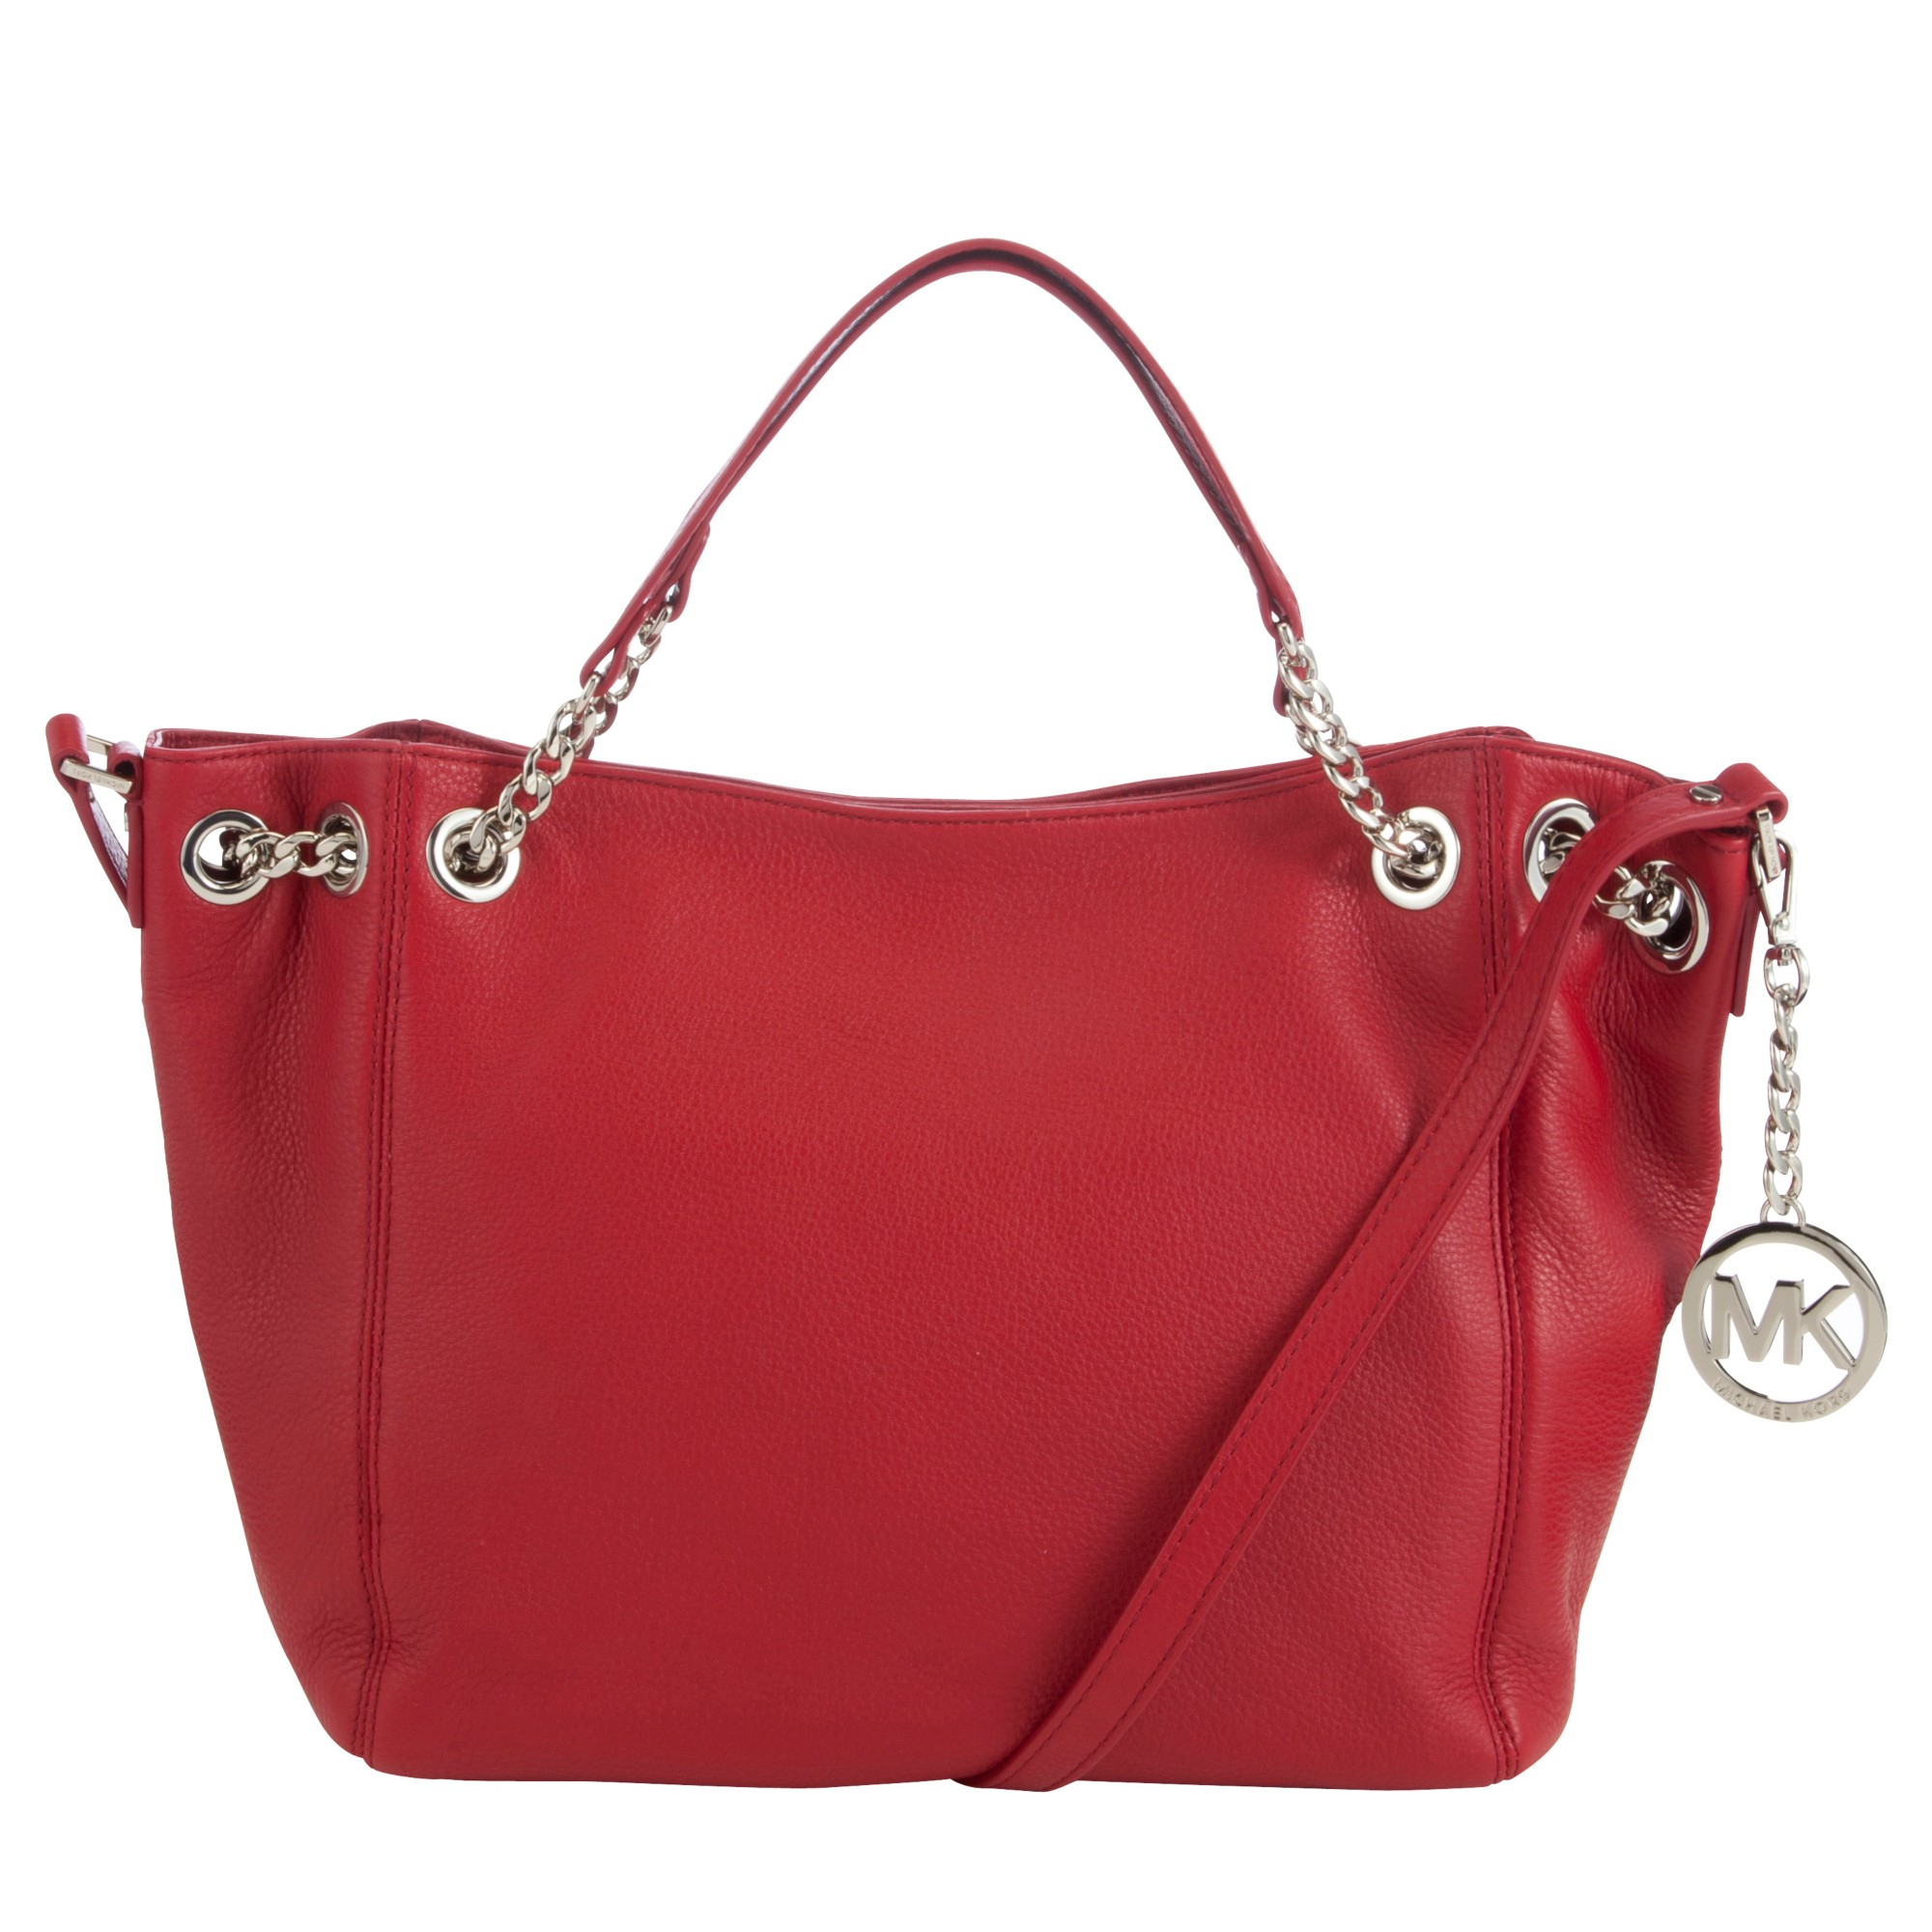 Michael Kors Jet Set Chain Leather Tote Bag in Red (Scarlet) | Lyst